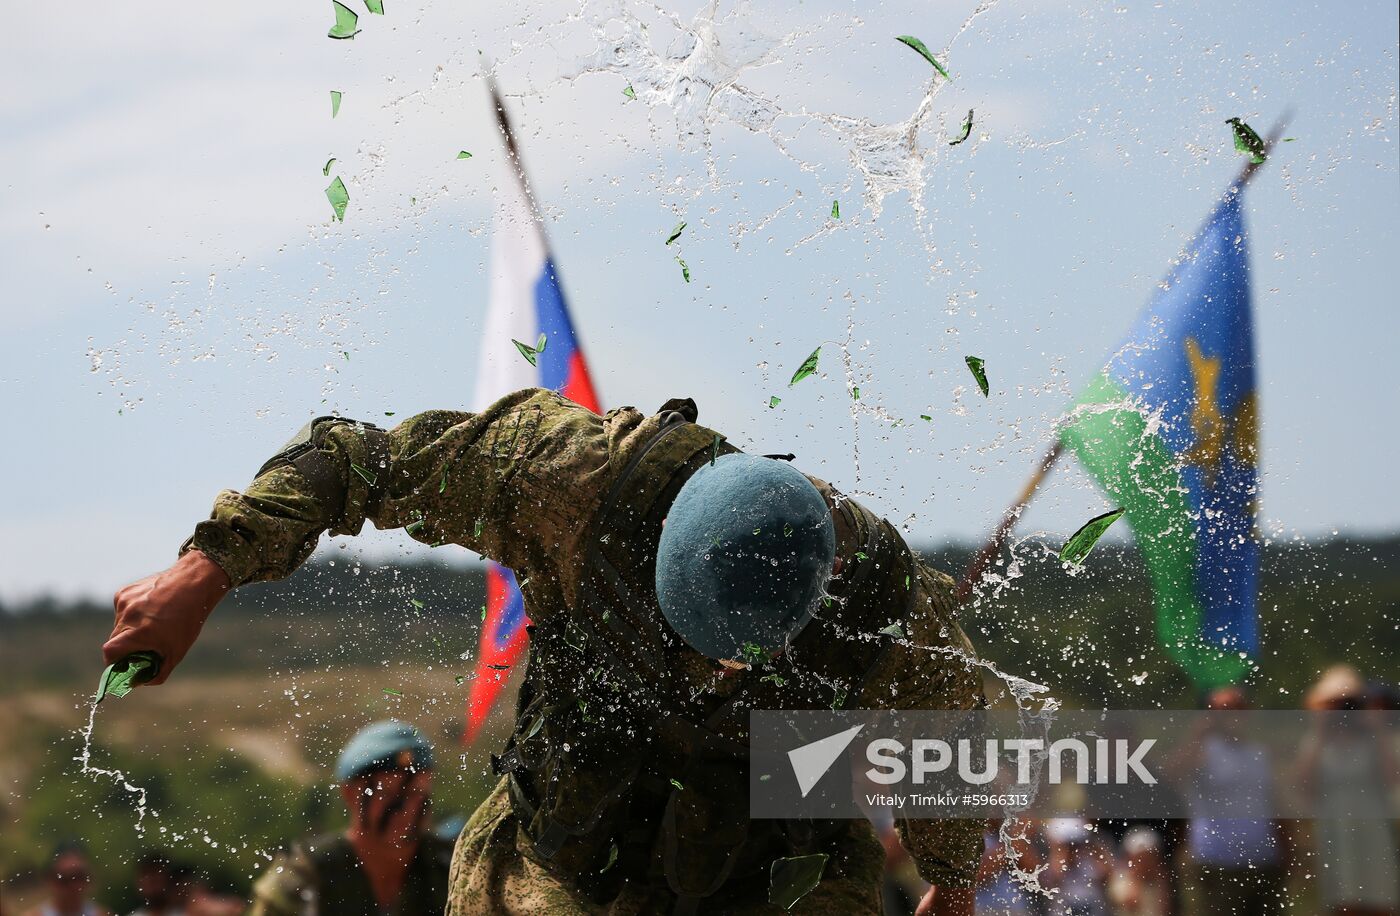 Russia Paratroopers Day